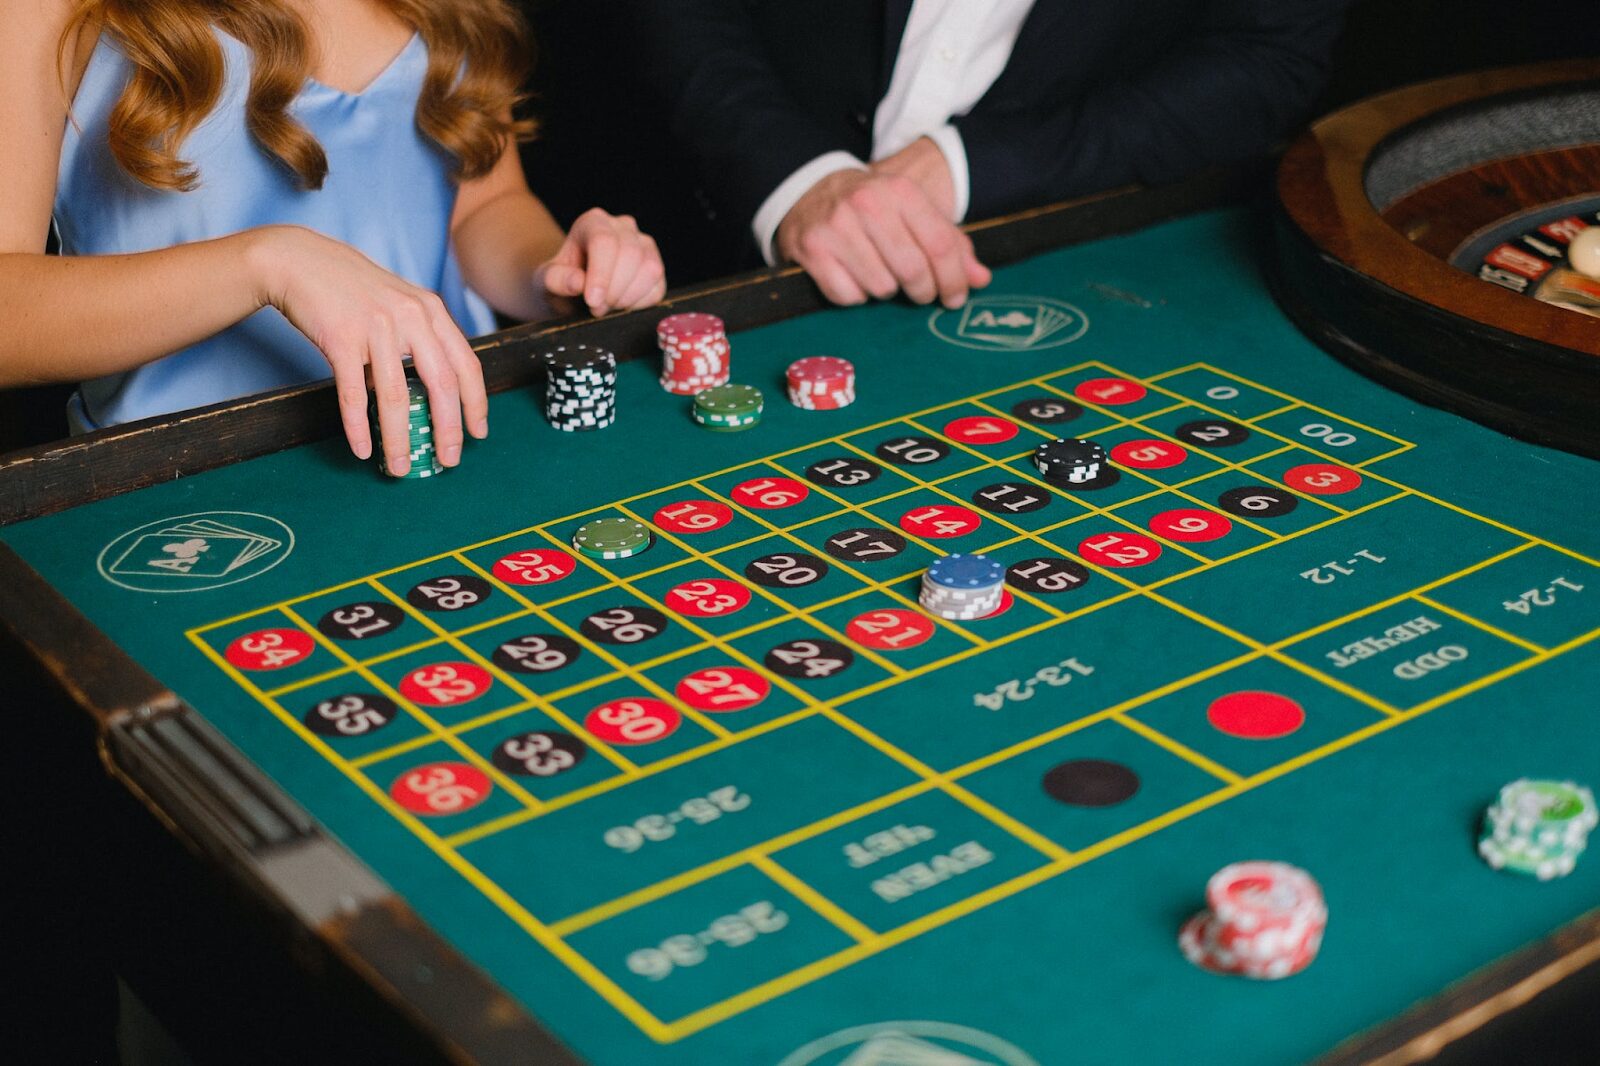 Online Casino VIP Club: How to Become a VIP Player? - TheGWW.com